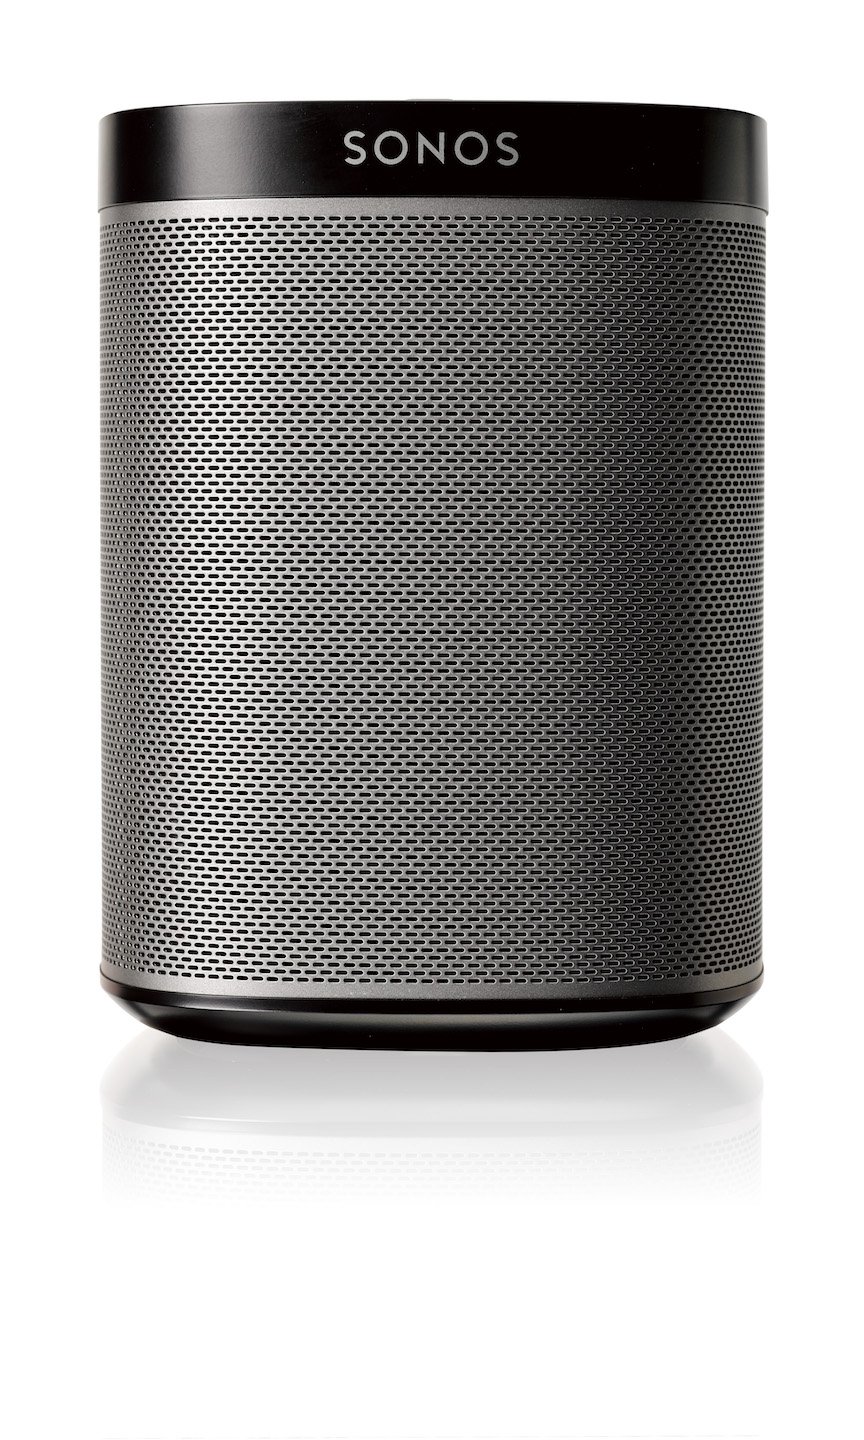 Sonos Play:1 - Compact Wireless Smart Speaker - Black (Discontinued by manufacturer)